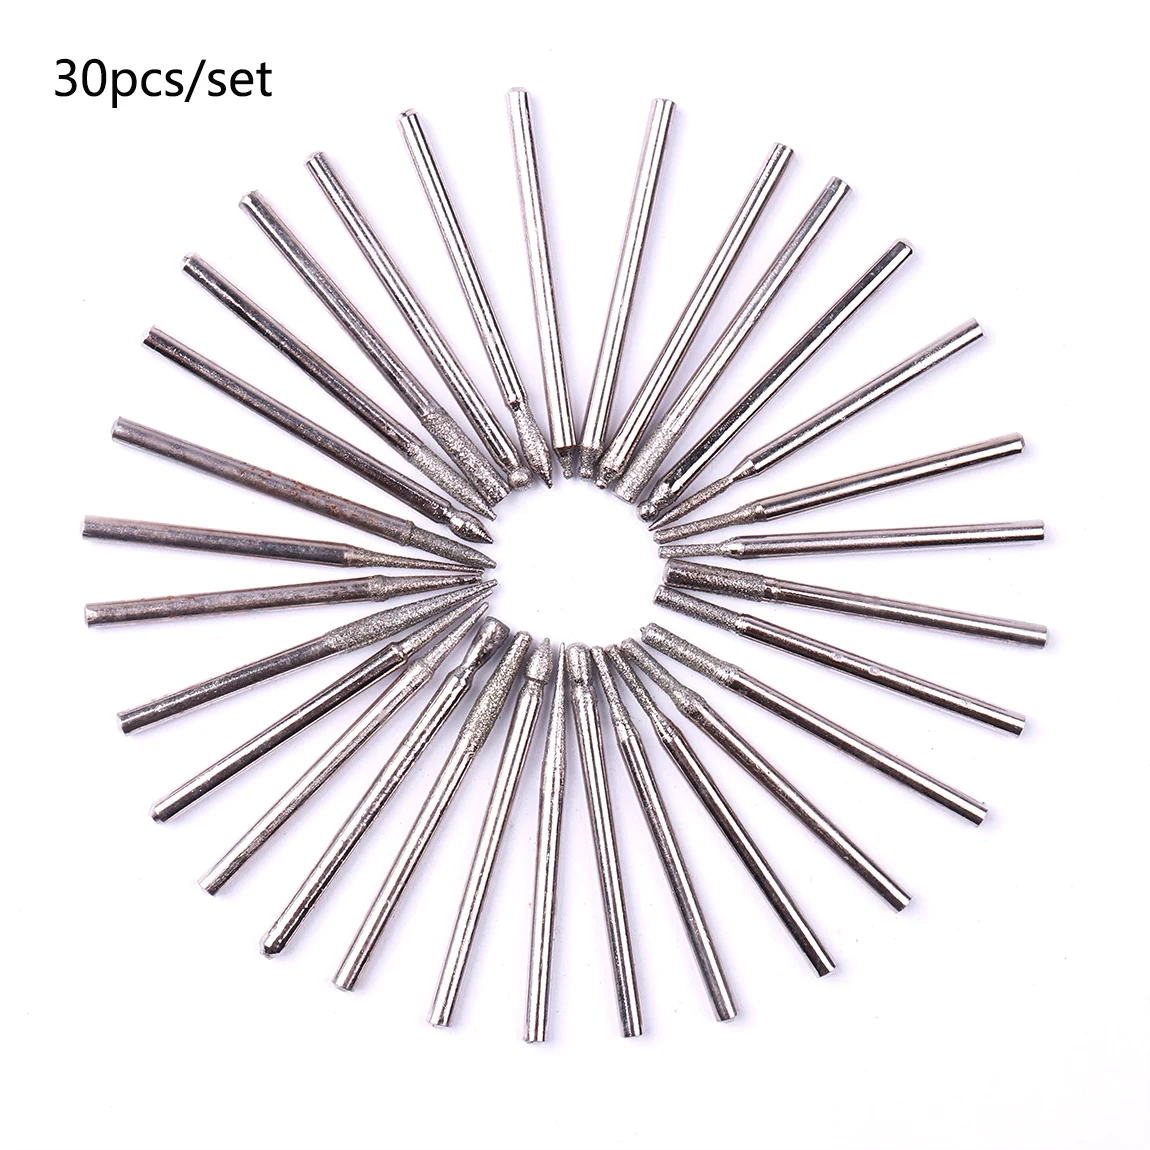 30pcs grinding head drill bits diamond burrs for wood metal glass jewerly rotary tool drill bit engraving tool set 3mm shanks CHEERBRIGHT 30Pc Diamond Coated Cuticle Removal Nail Drill Set Rotary Grinding Burrs Glass Drill Bit DIYTool Set